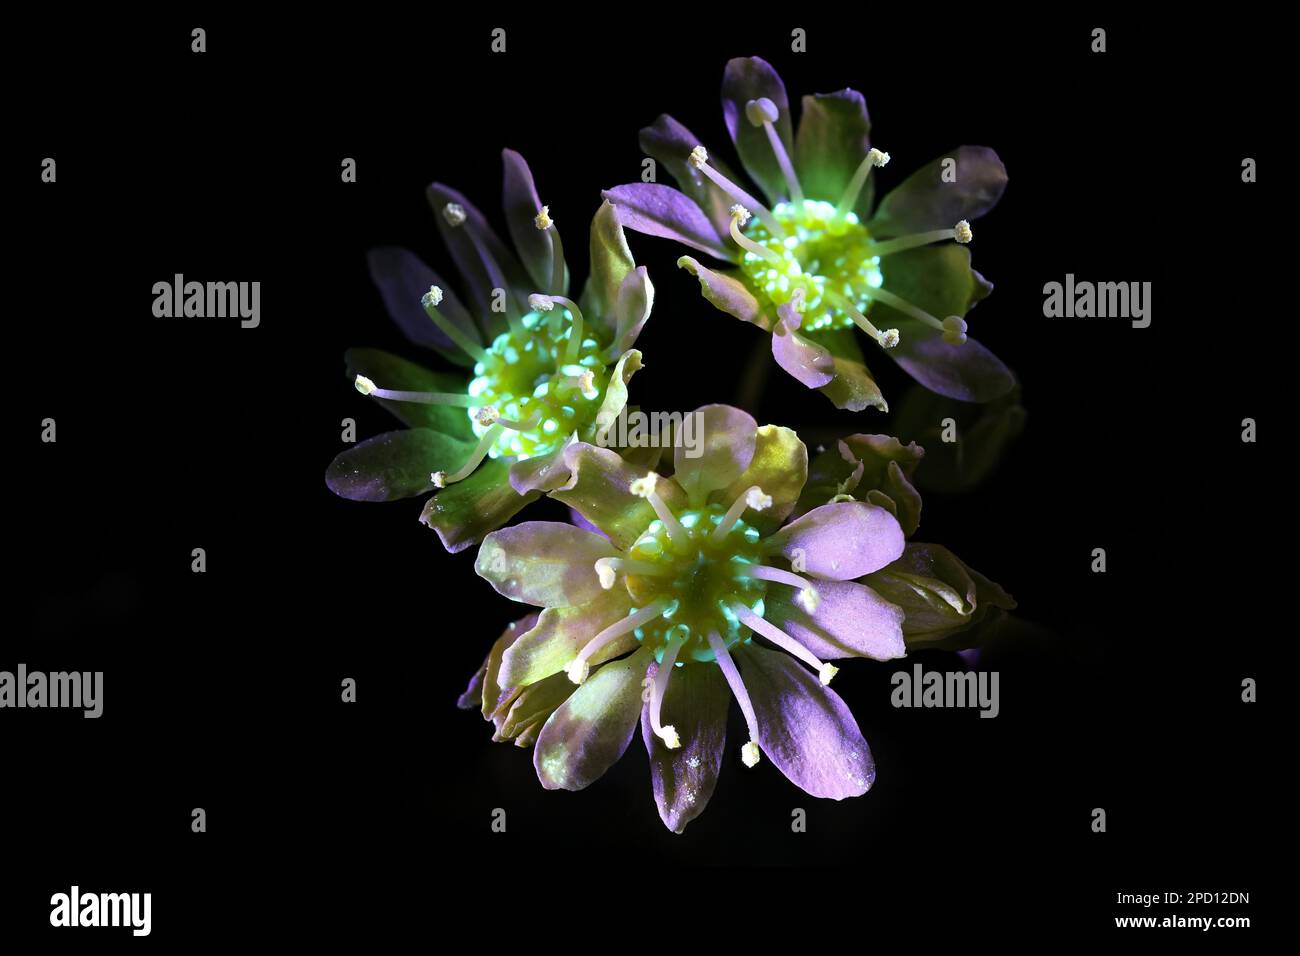 Fluorescent flowers of Norway maple  Acer platanoides, photographed in ultraviolet light (365 nm) Stock Photo